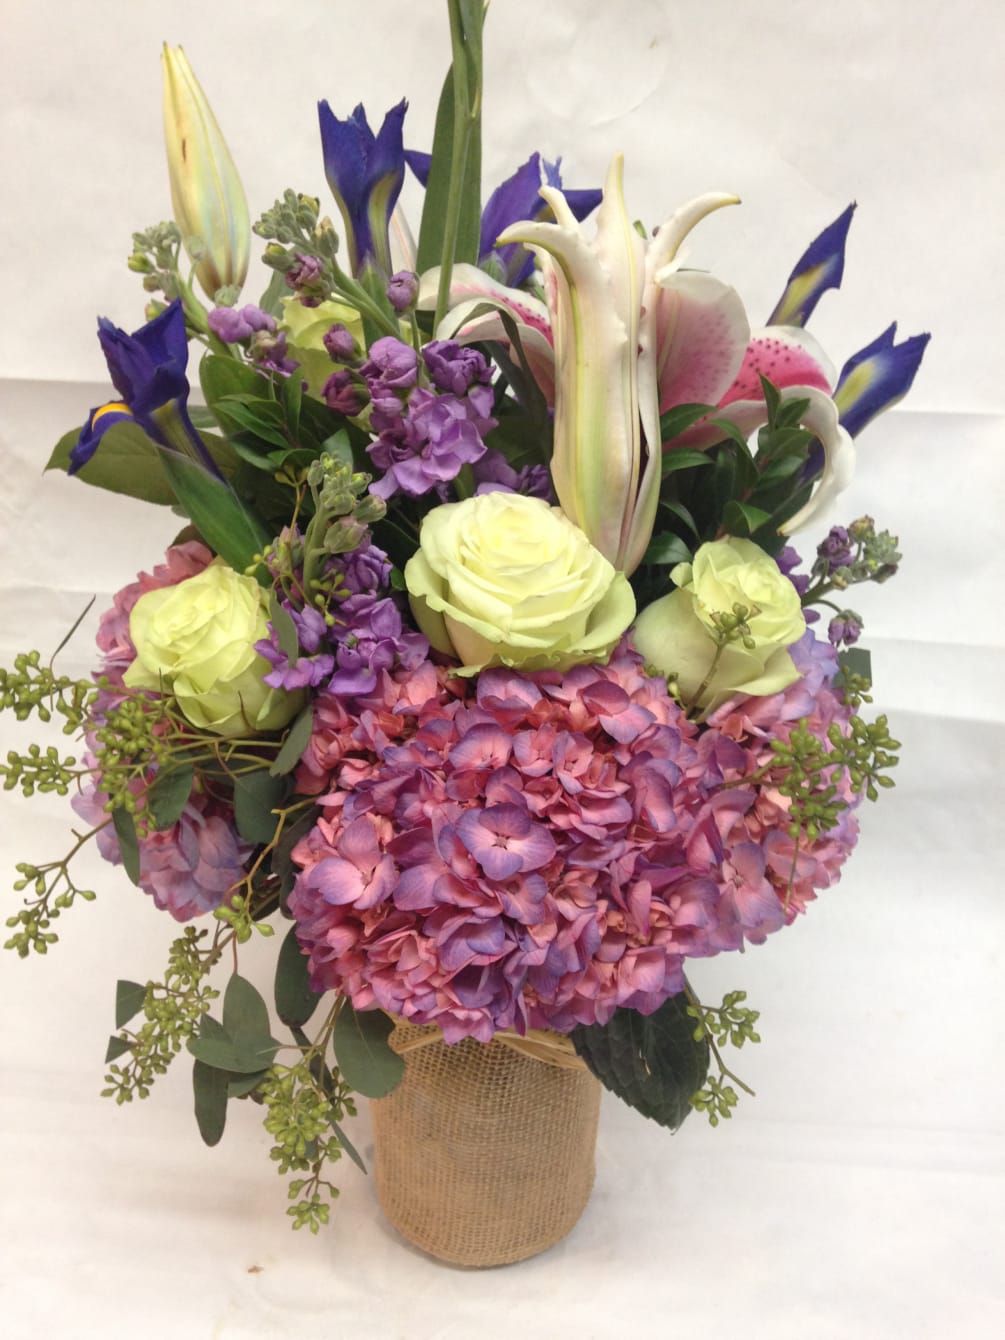 This fresh arrangement features the sights and smells of early summer: hydrangea